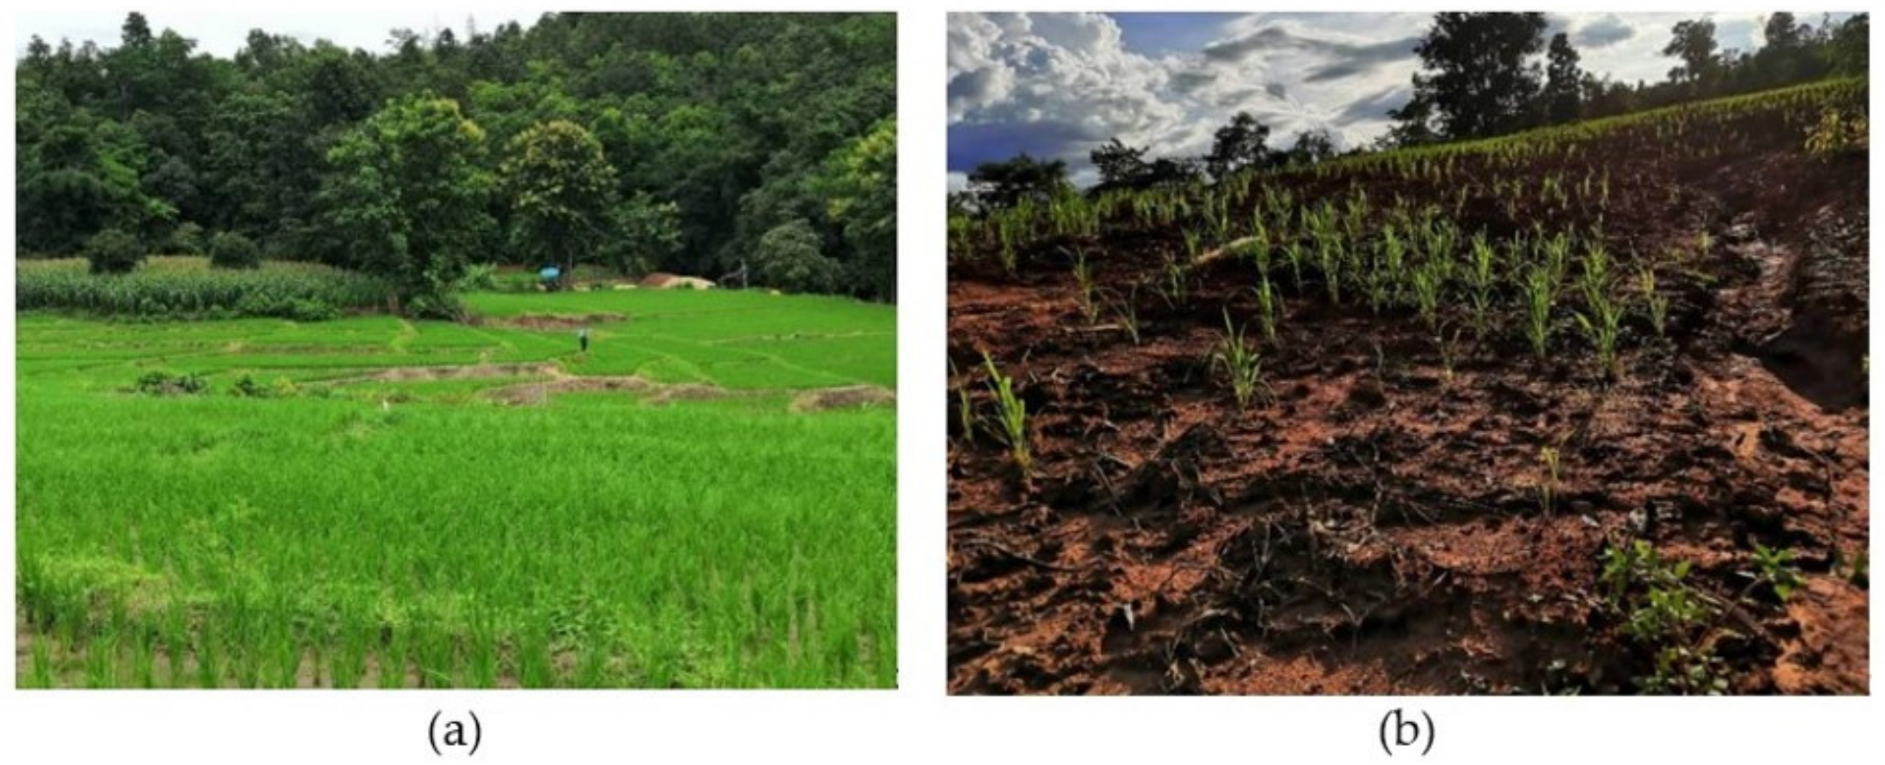 Sustainability | Free Full-Text | Food Sovereignty and Food Security:  Livelihood Strategies Pursued by Farmers during the Maize Monoculture Boom  in Northern Thailand